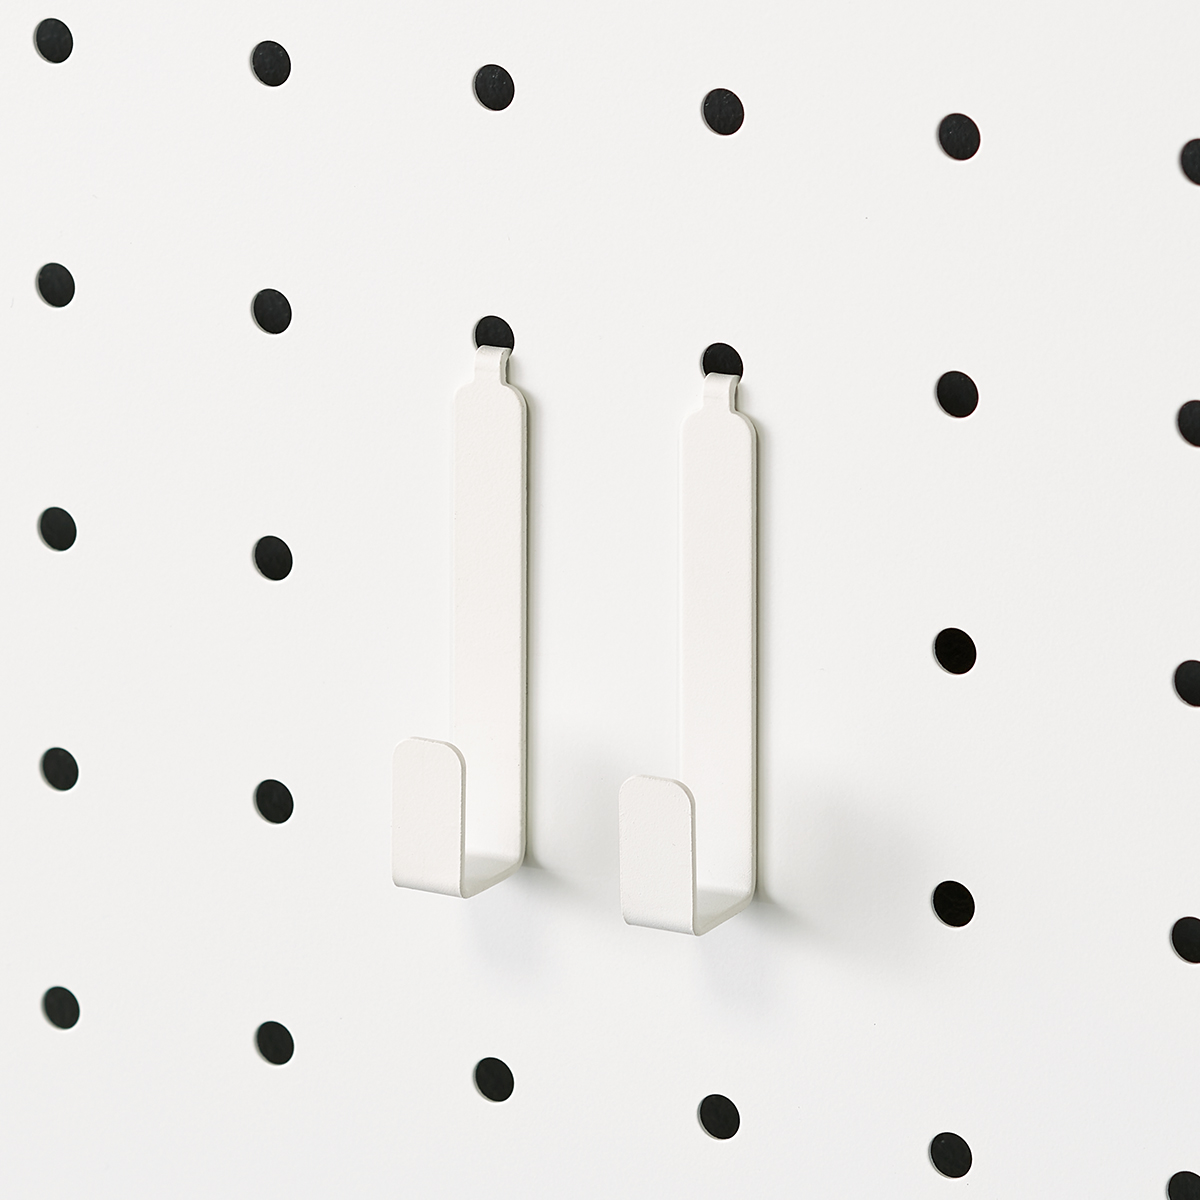 Circle Pegboard Designs and Inspirations! 